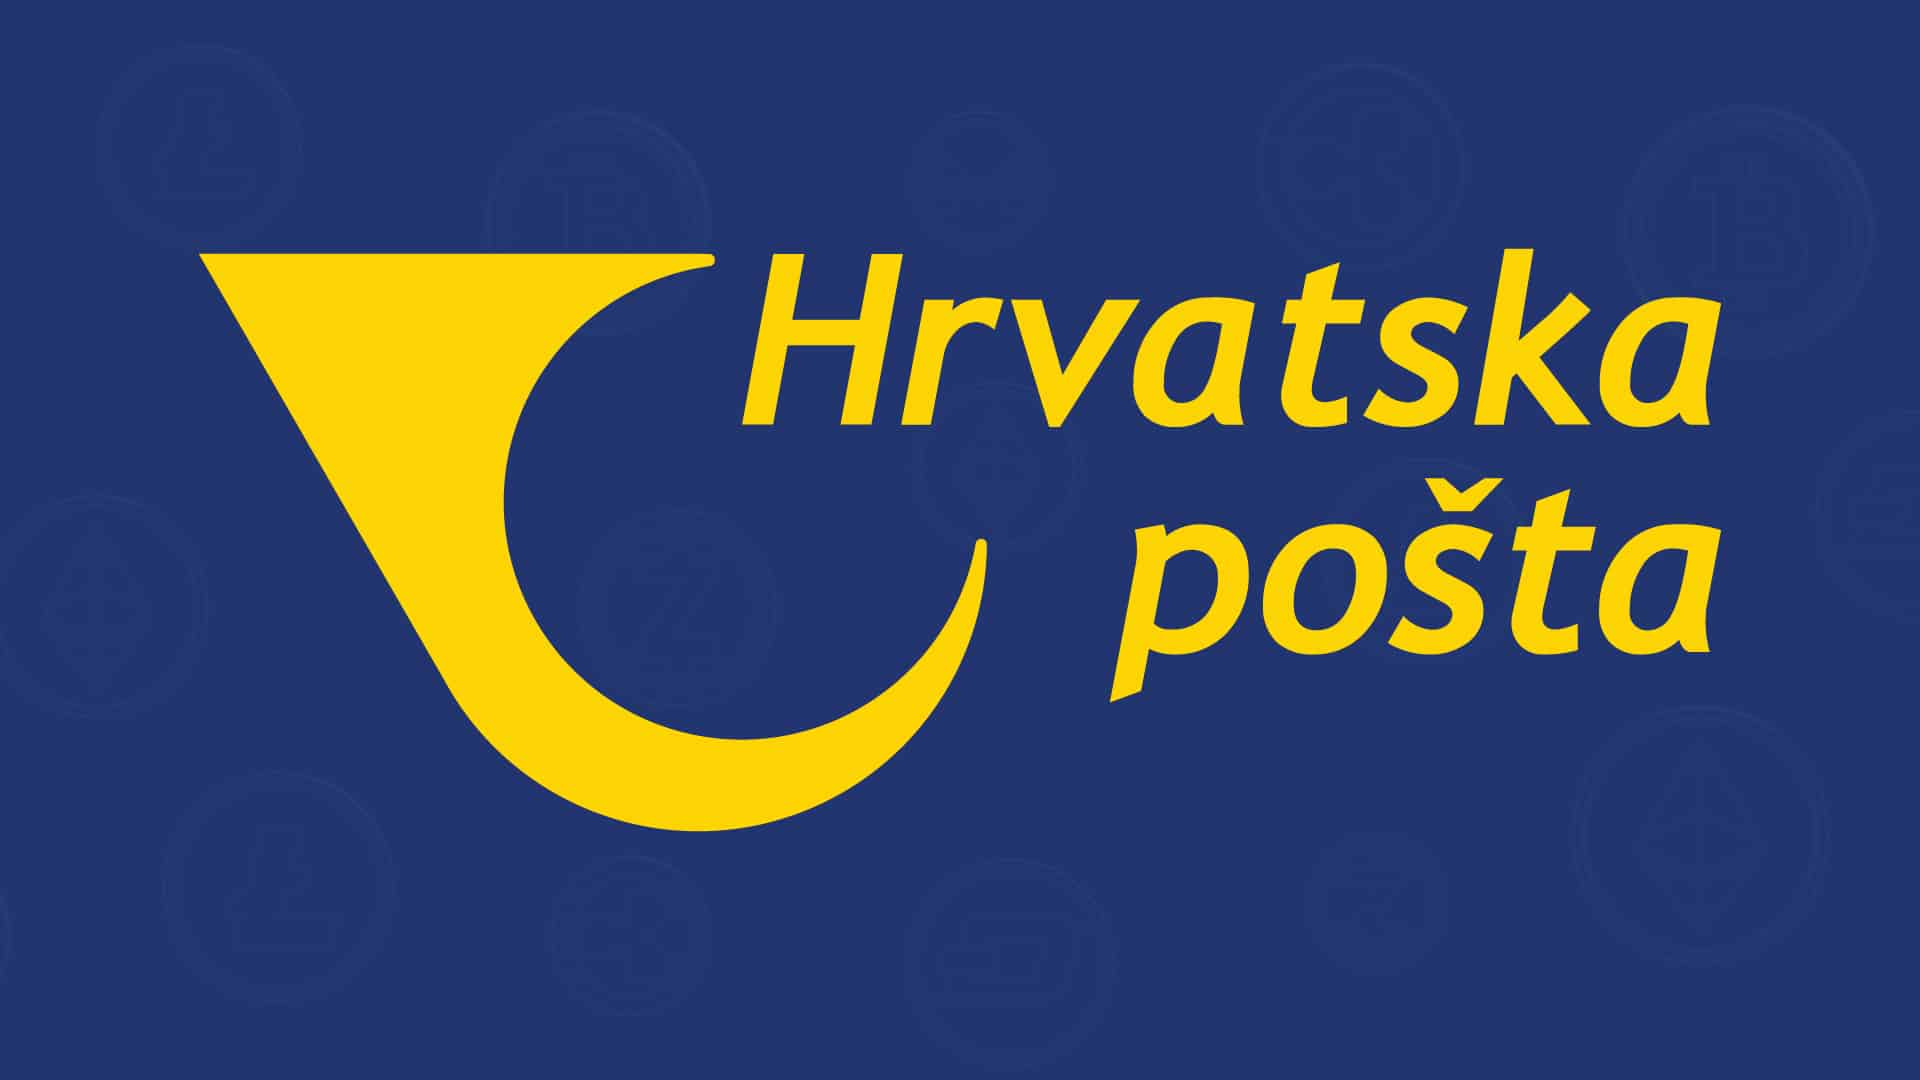 Croatian Post Launches Cryptocurrency Exchange Services in 55 Offices